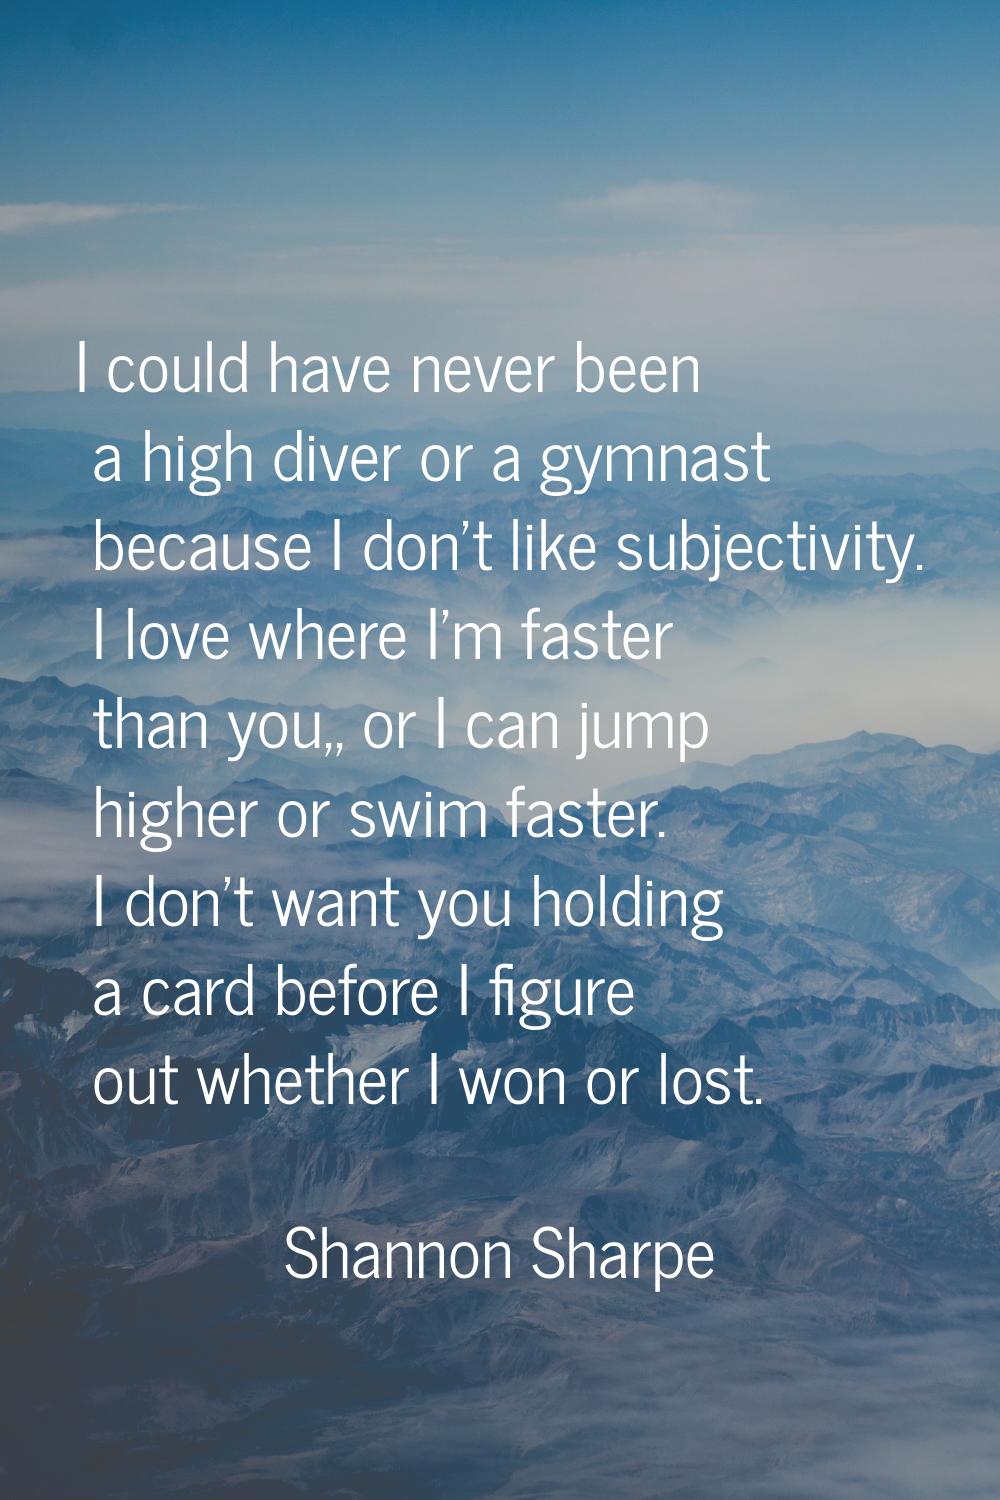 I could have never been a high diver or a gymnast because I don't like subjectivity. I love where I